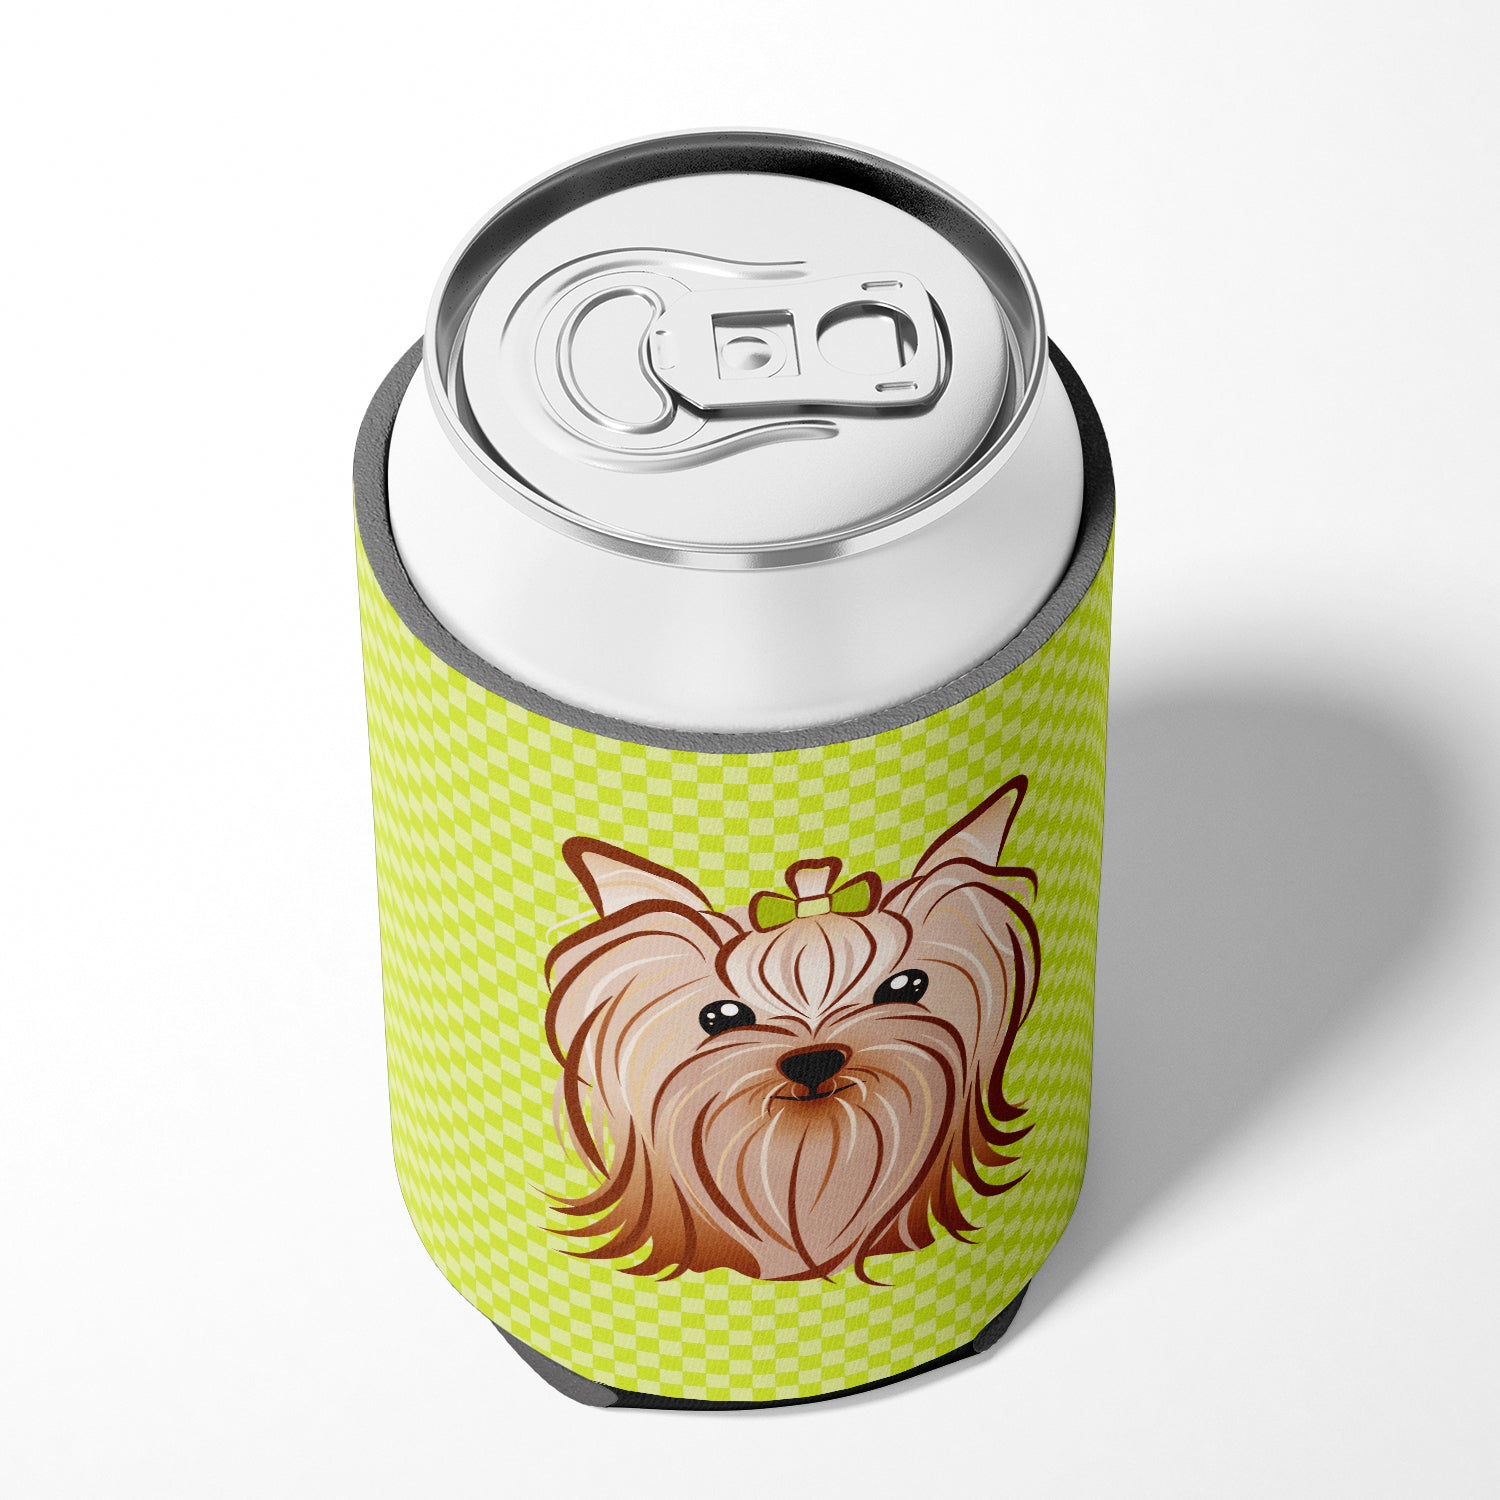 Checkerboard Lime Green Yorkie Yorkshire Terrier Can or Bottle Hugger BB1266CC